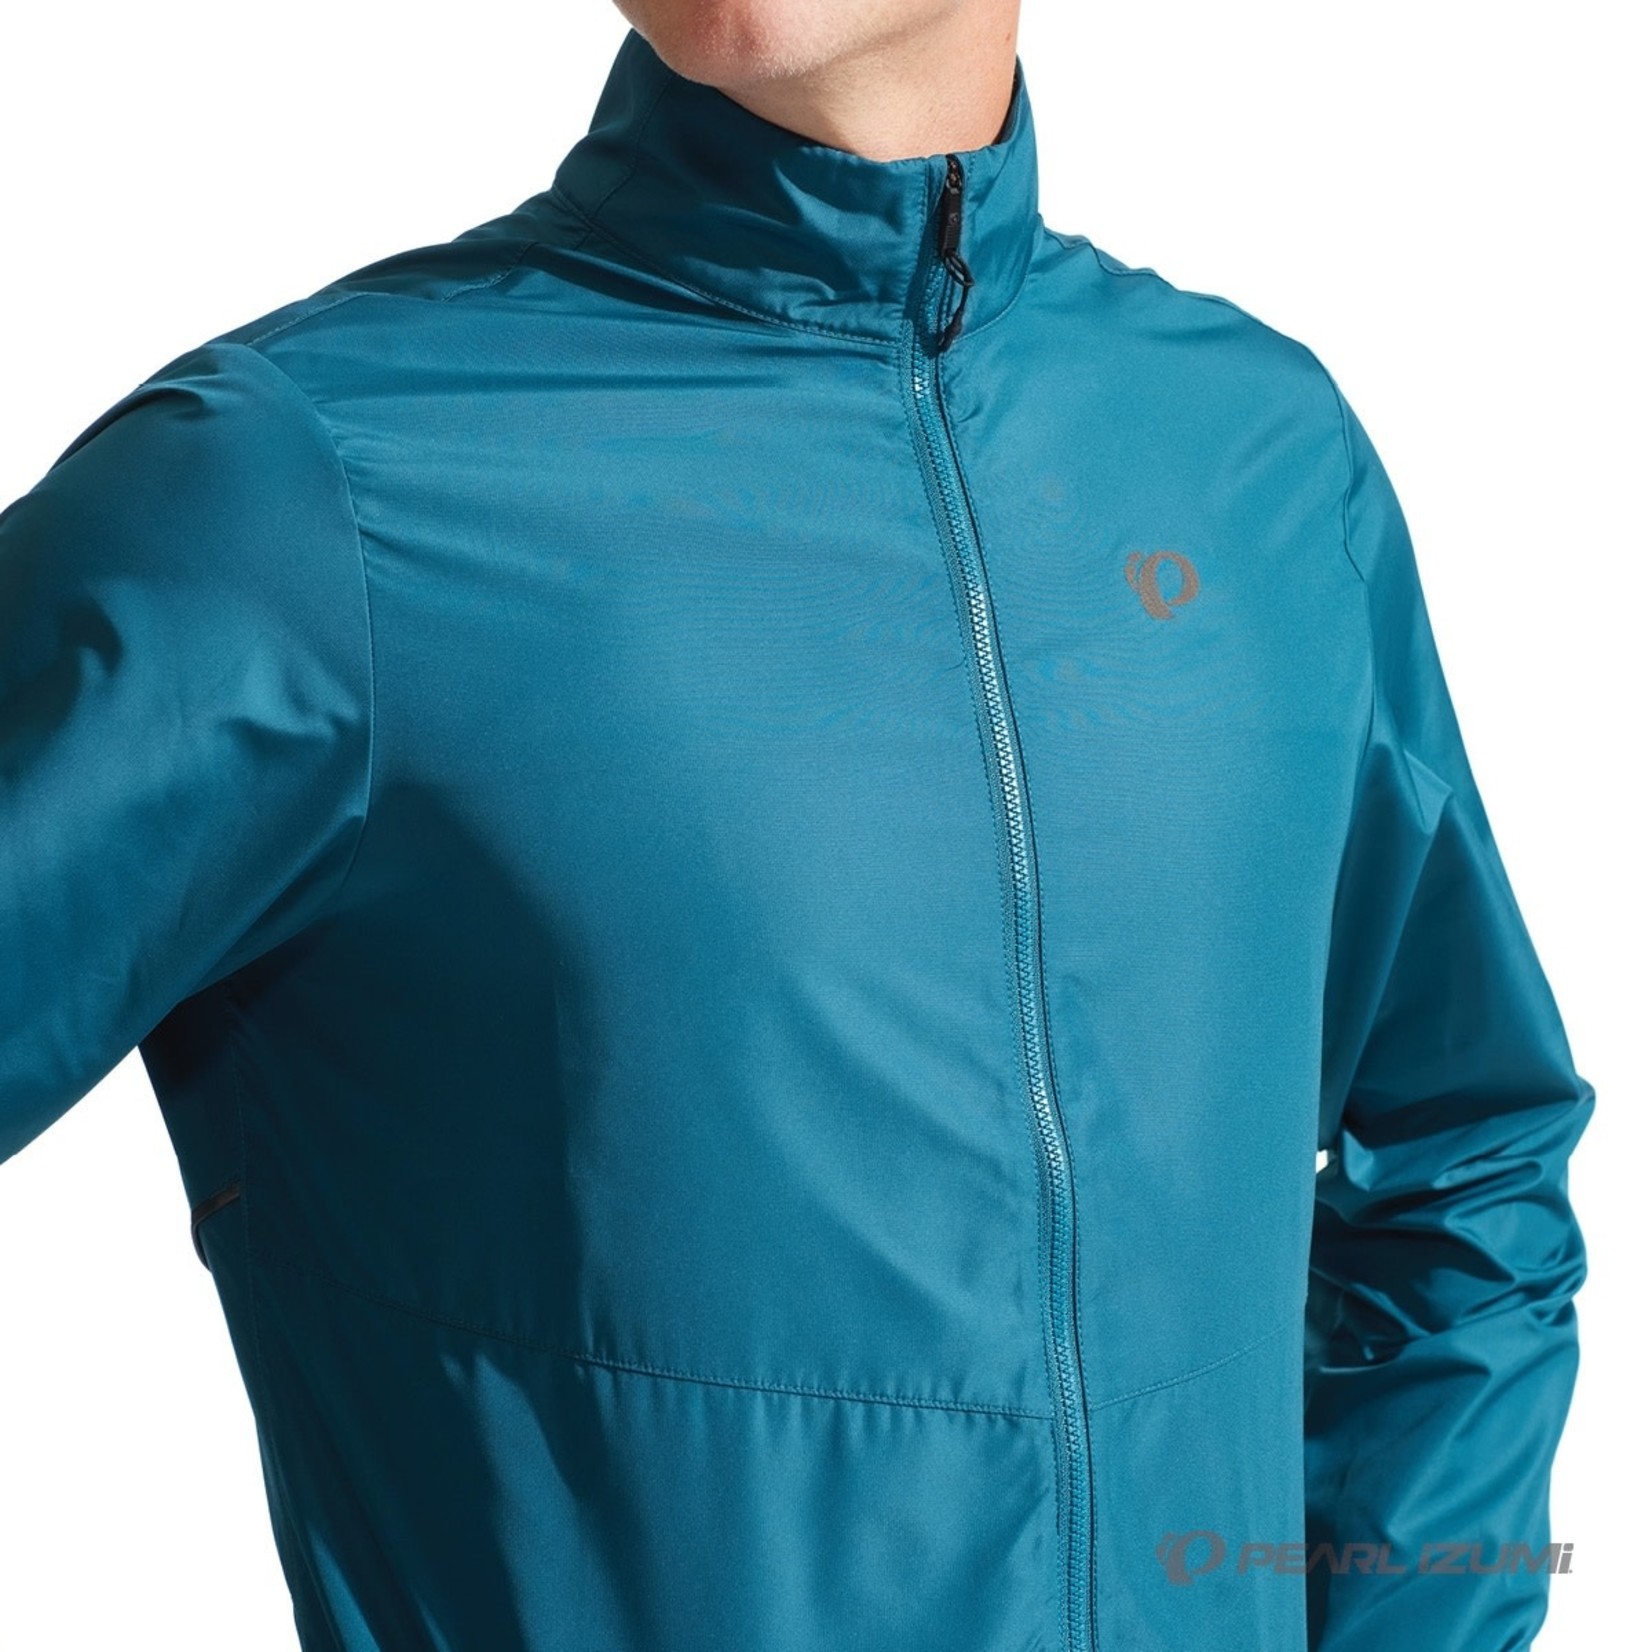 Shimano Pearl Izumi Quest Barrier 100% Recycled Material Bike Jacket - Ocean Blue